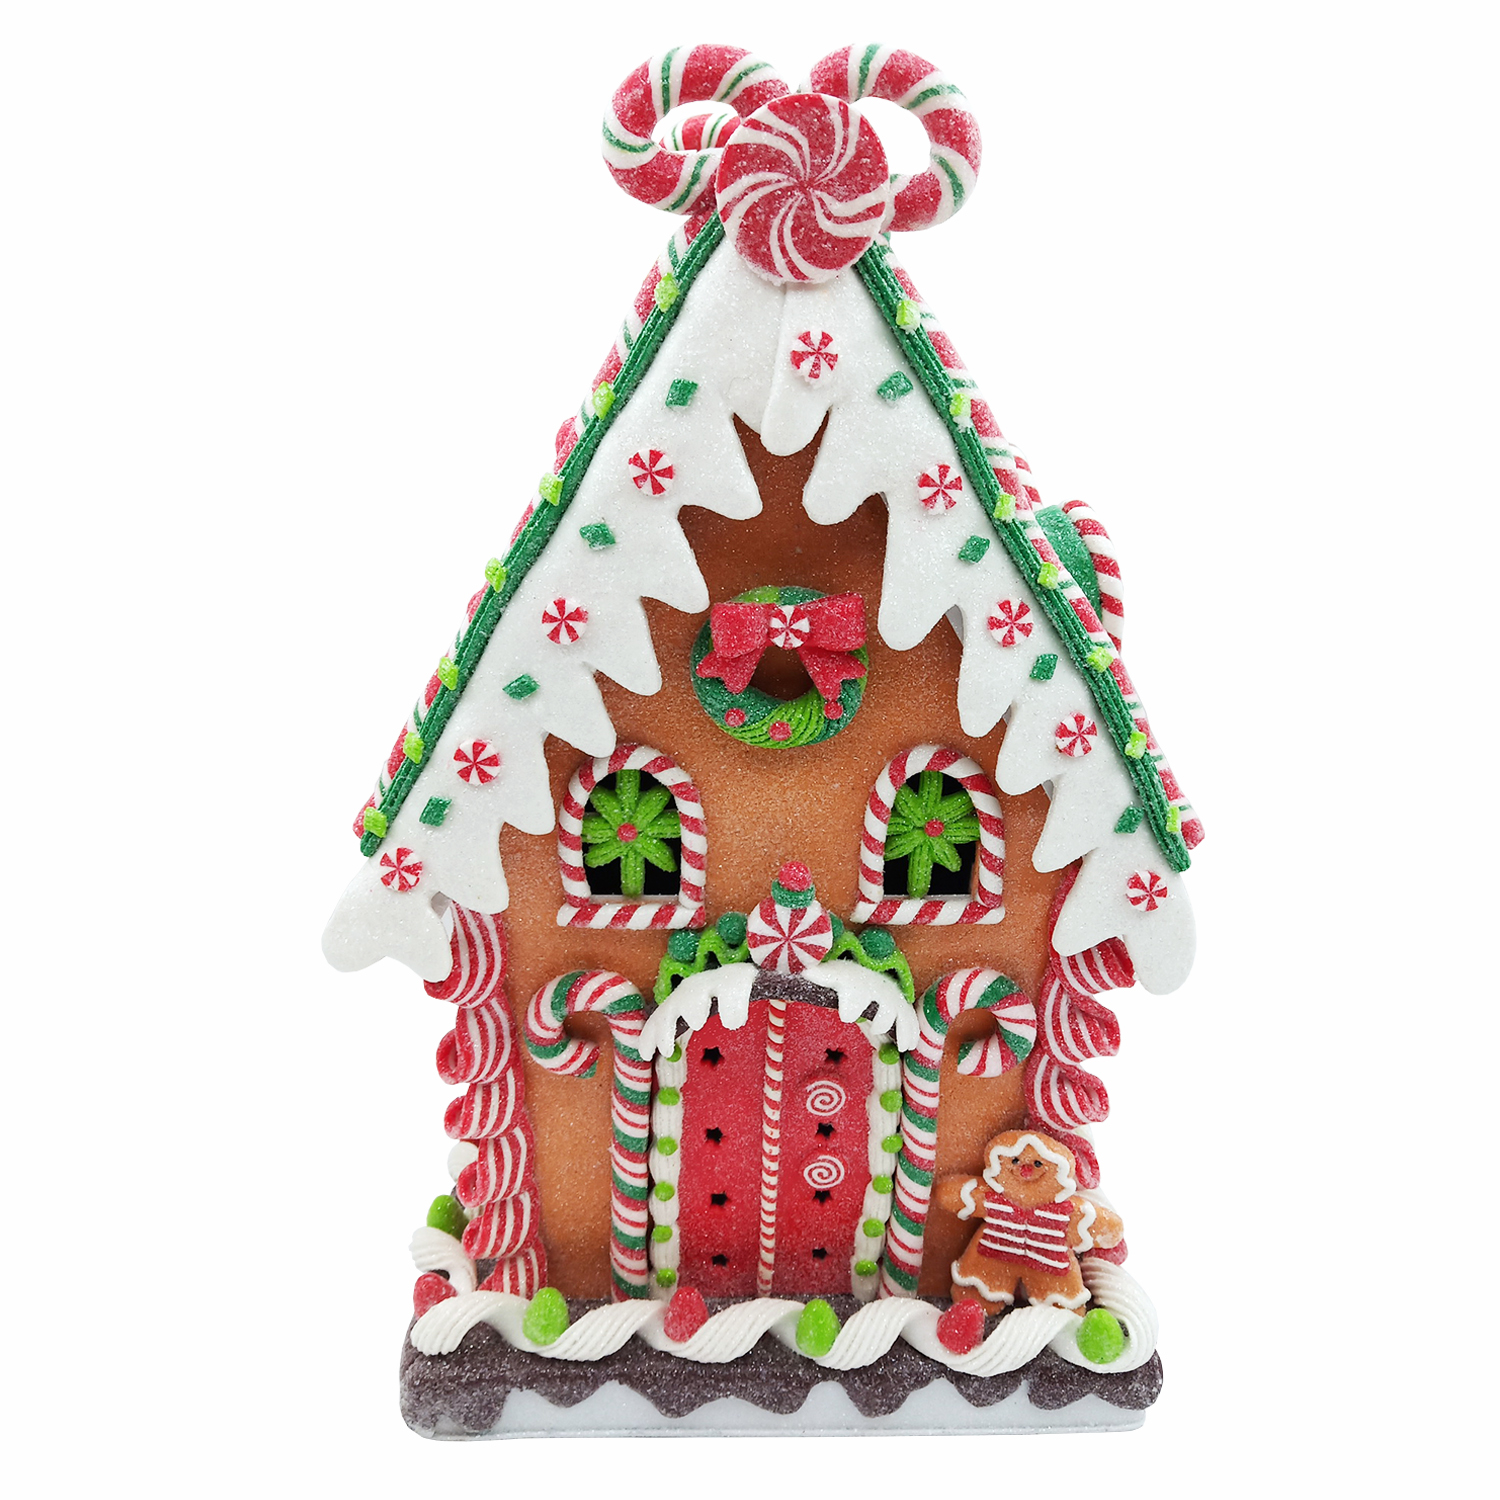 GINGERBREAD HOUSE 8